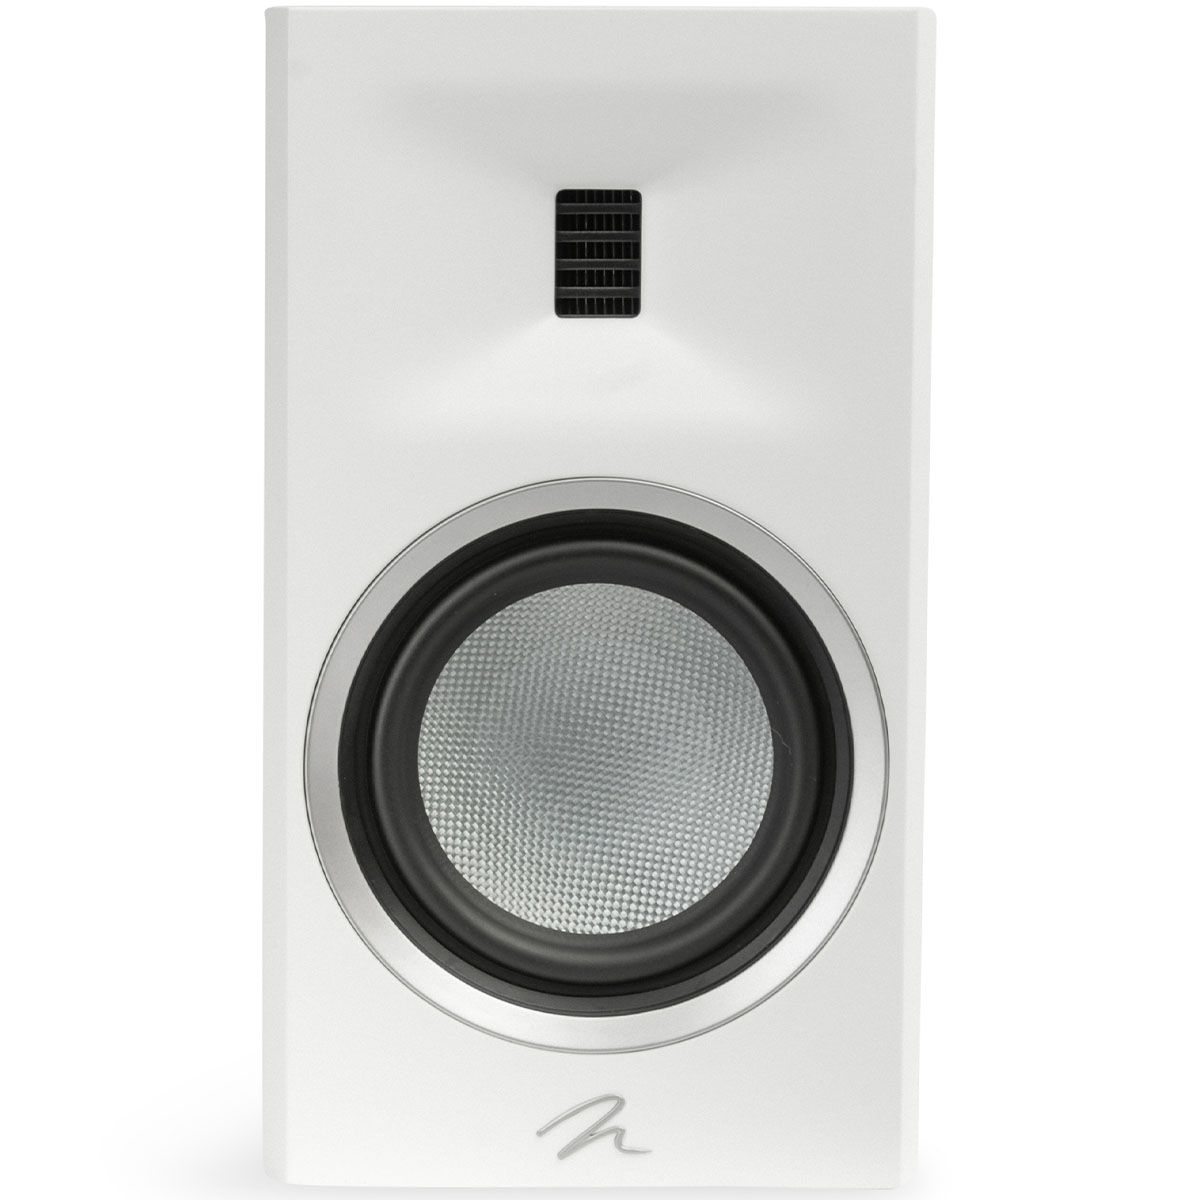 MartinLogan Motion XT B10  Bookshelf Speaker in white, front view without grilles on white background